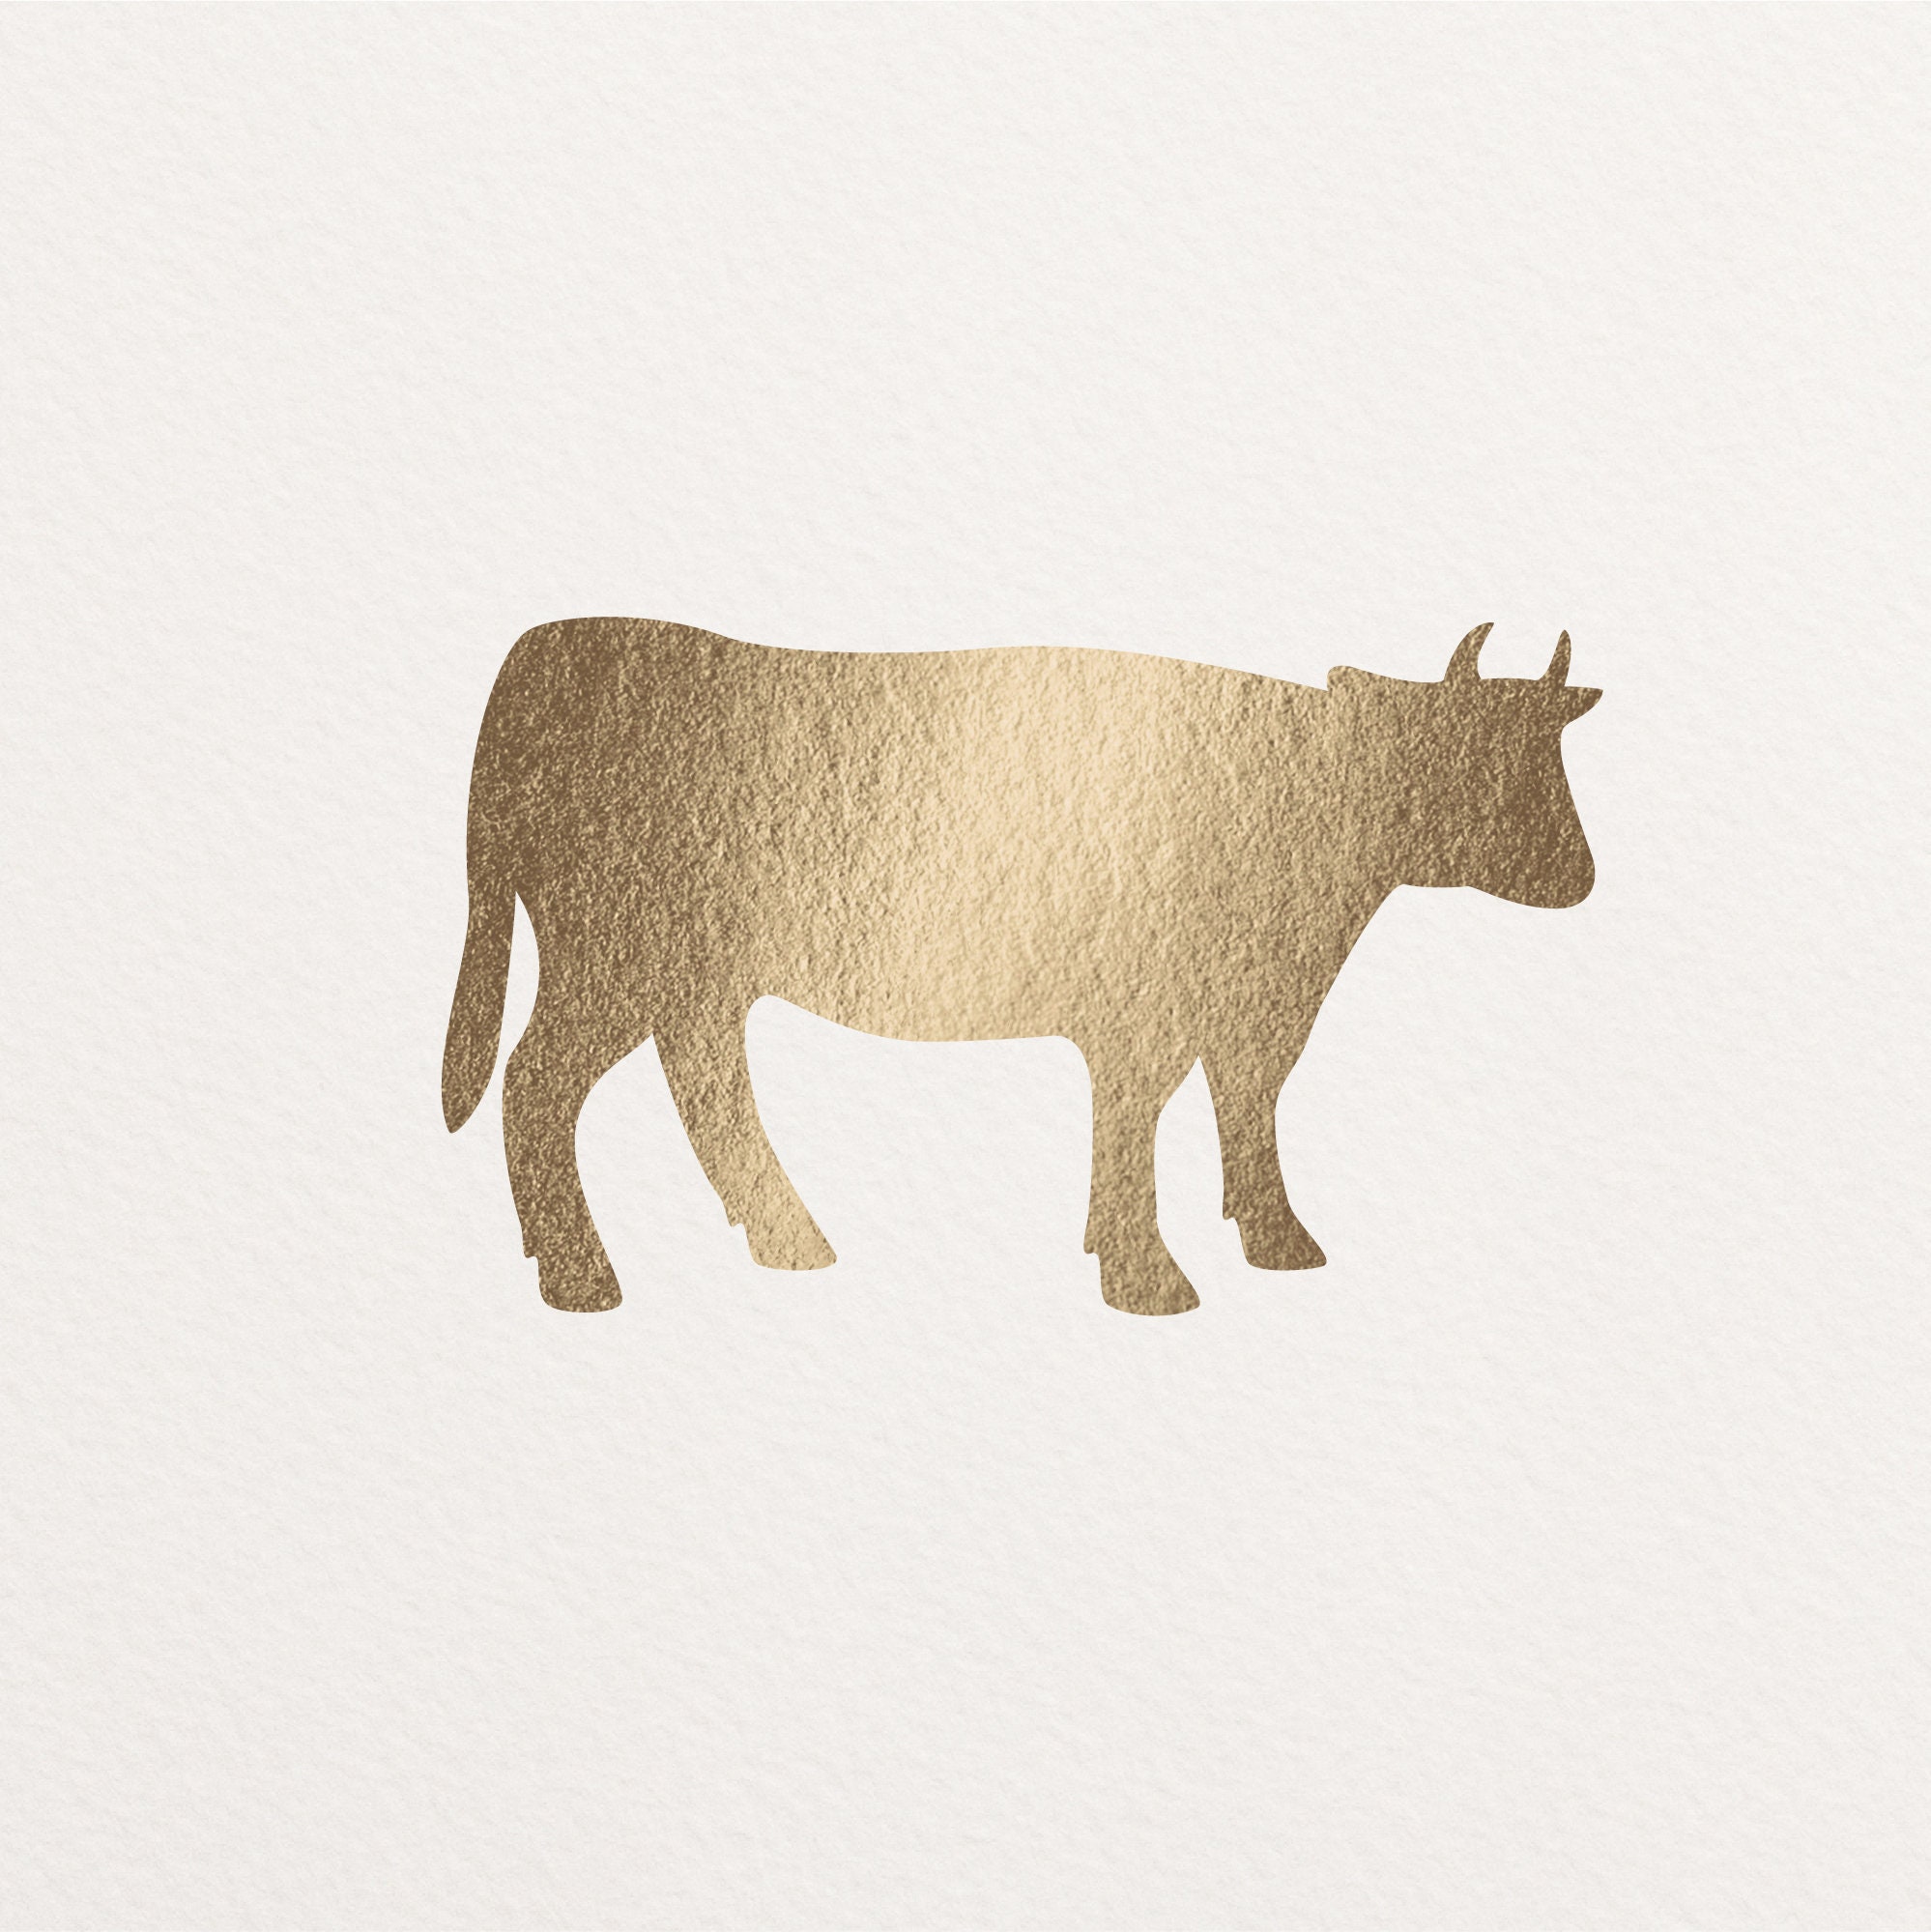 Real Gold Foil Meal Selection Sticker, Beef, Chicken, Seafood, Lamb, Vegetarian - 20 Per Sheet